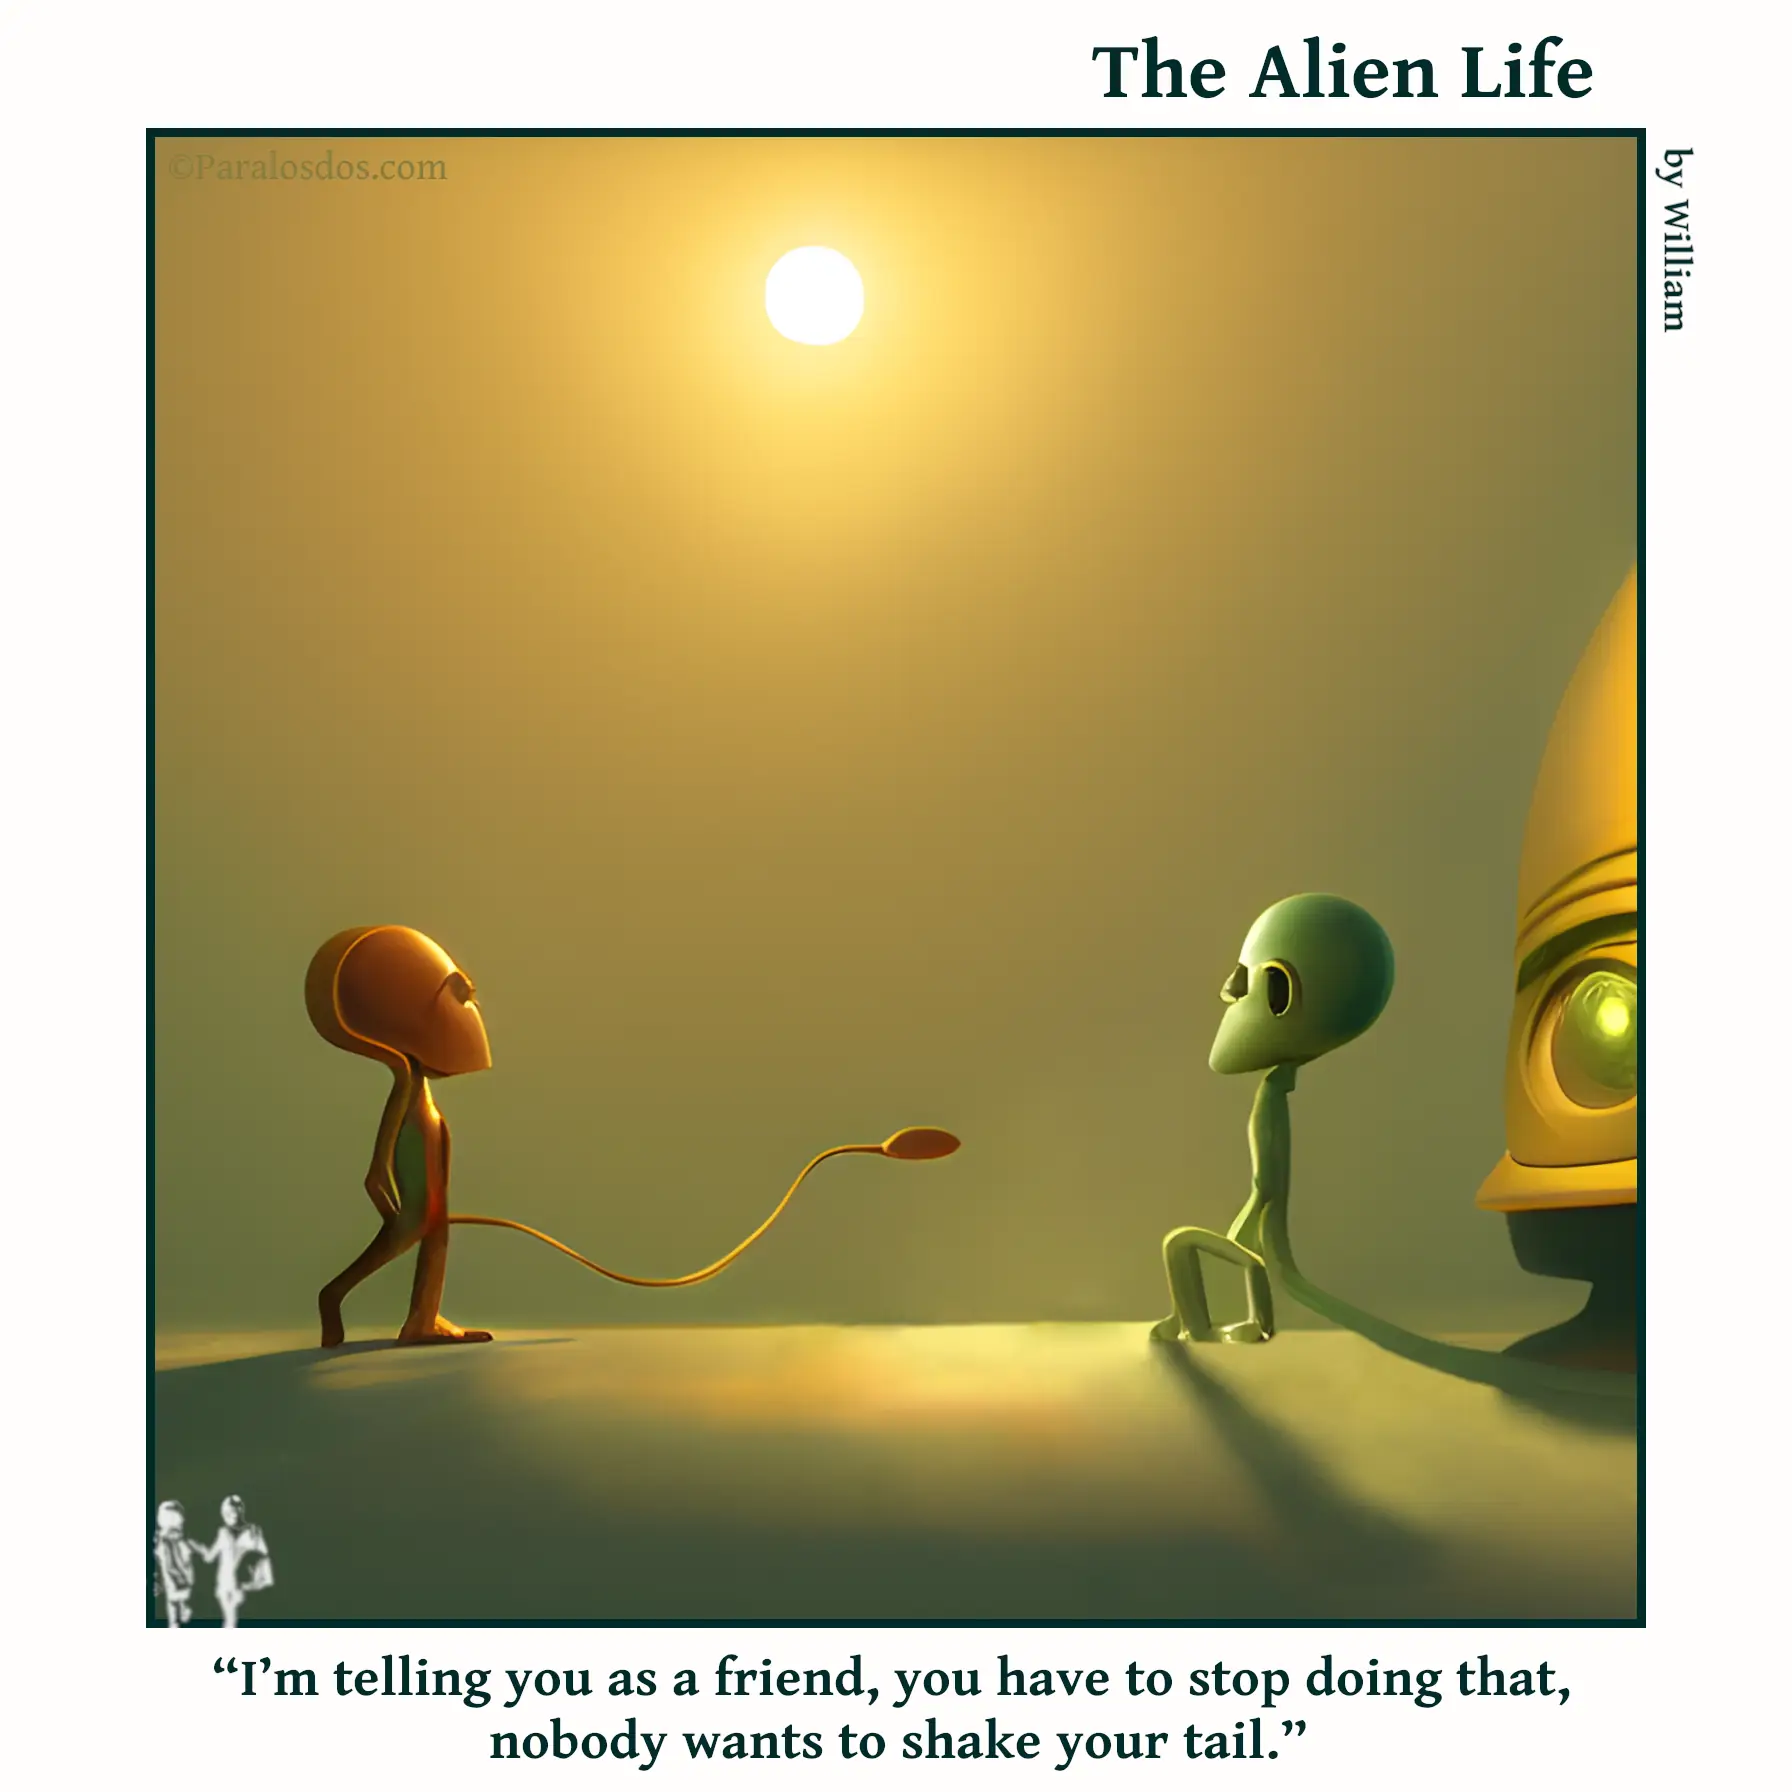 The Alien Life, one panel Comic. Two aliens are facing each other over a distance. The alien on the left has extended his tail towards the one on the right. It looks very weird. The caption reads: “I’m telling you as a friend, you have to stop doing that, nobody wants to shake your tail.”